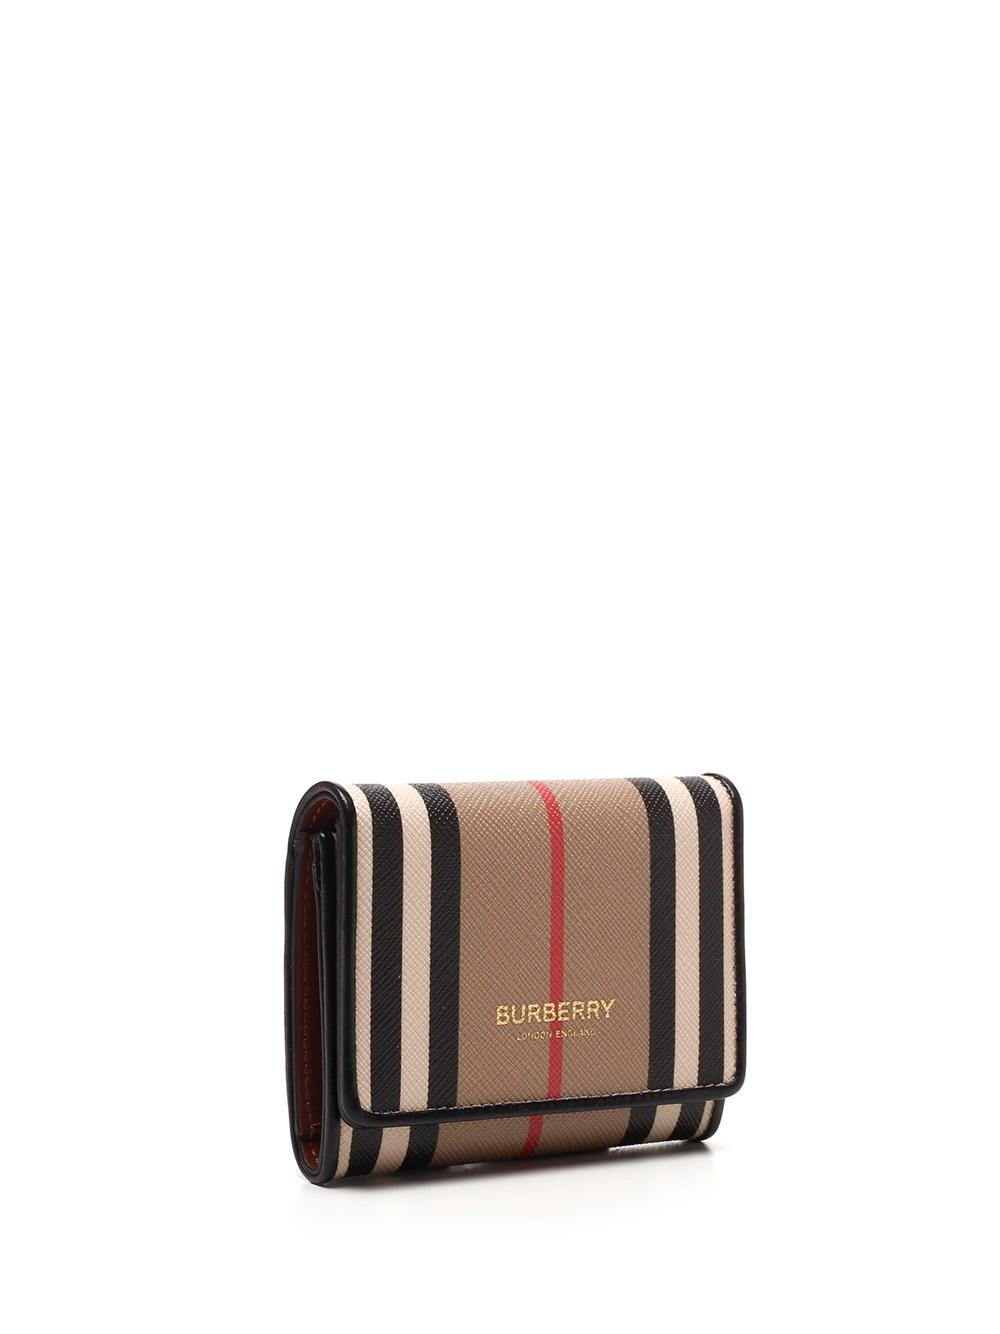 Burberry Canvas Small Icon Stripe Folding Wallet in Beige (Natural) - Save  31% - Lyst